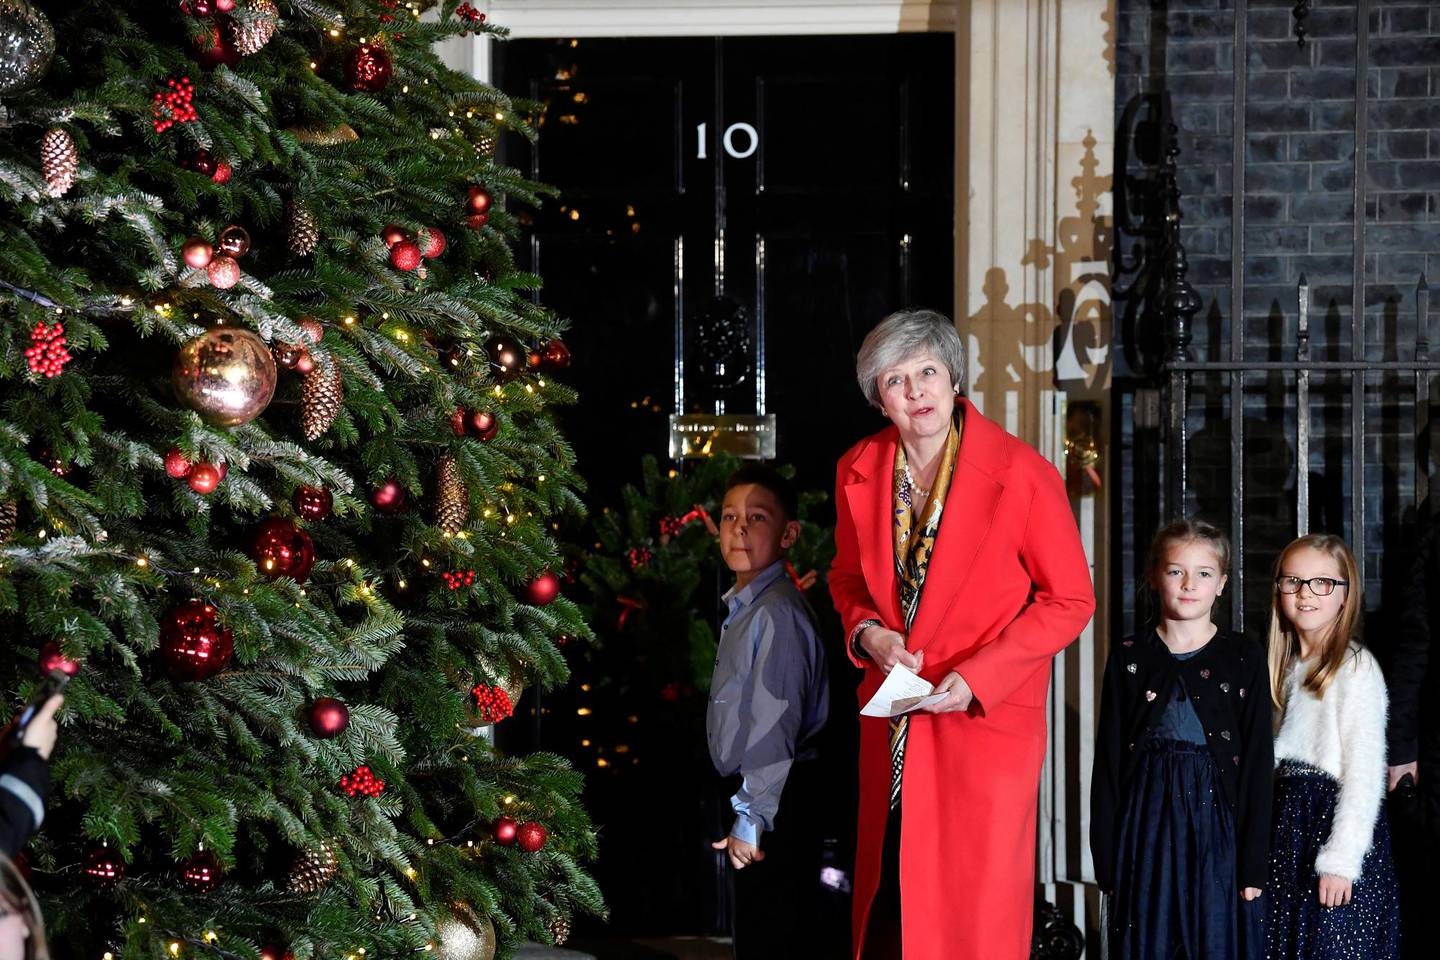 Britain's Prime Minister, Theresa May, looks on during the ceremony of switching on the lights of the Christmas tree in Downing Street, in central London, Britain December 6, 2018.  REUTERS/ Toby Melville